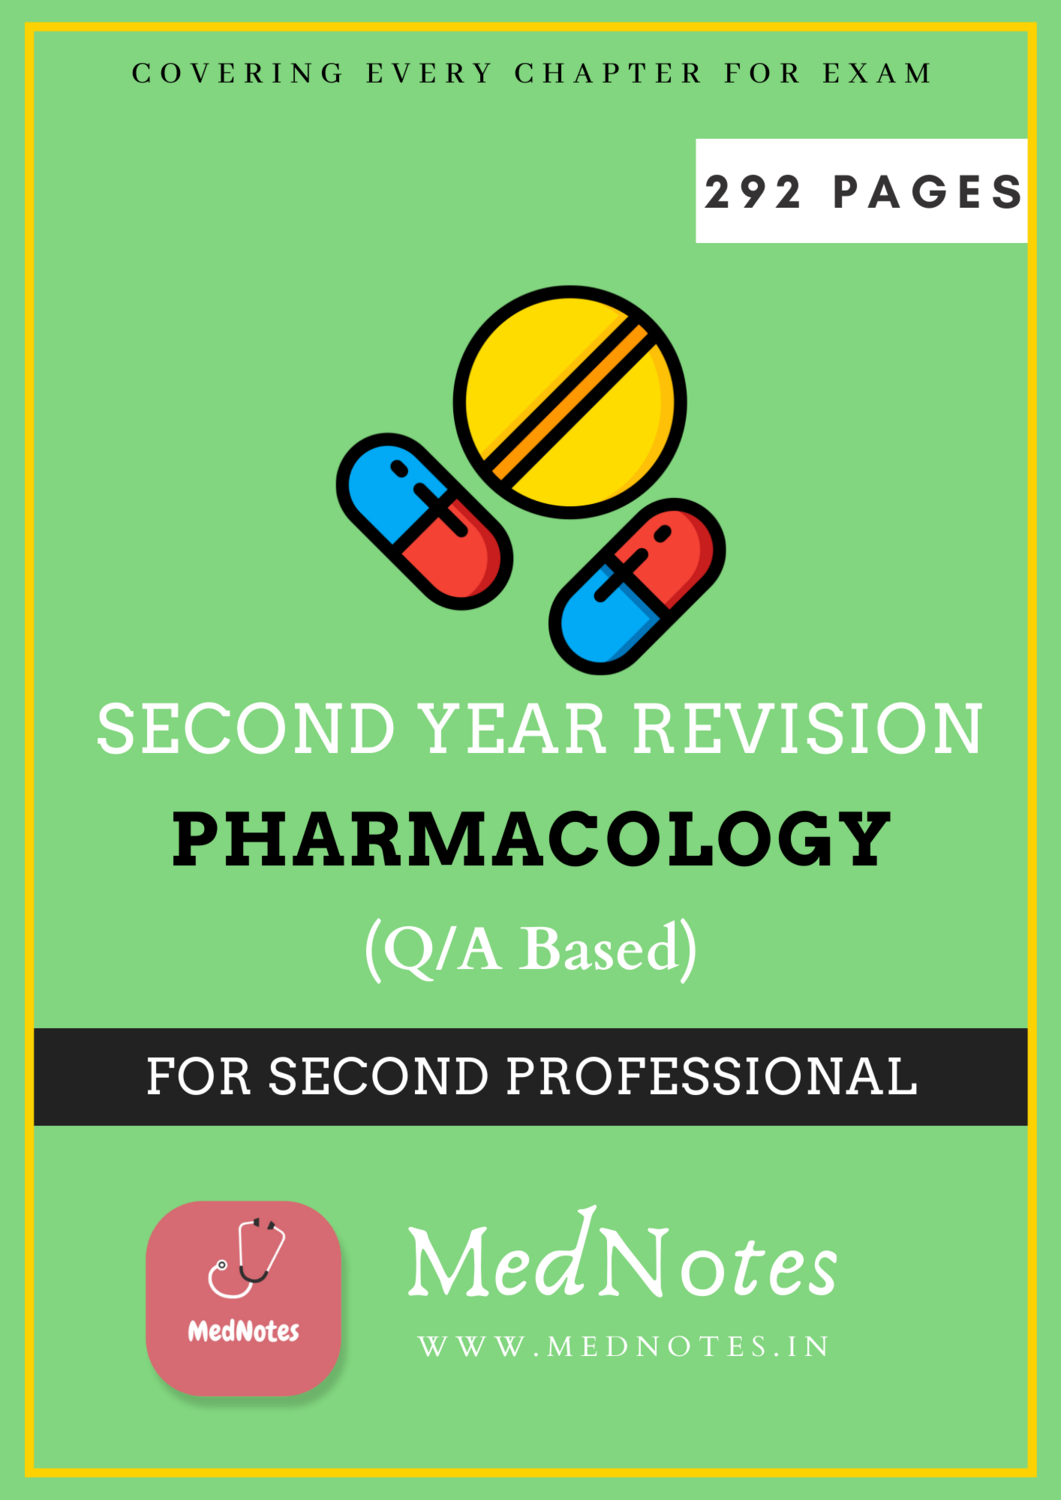 Full Pharmacology Revision - Second Professional